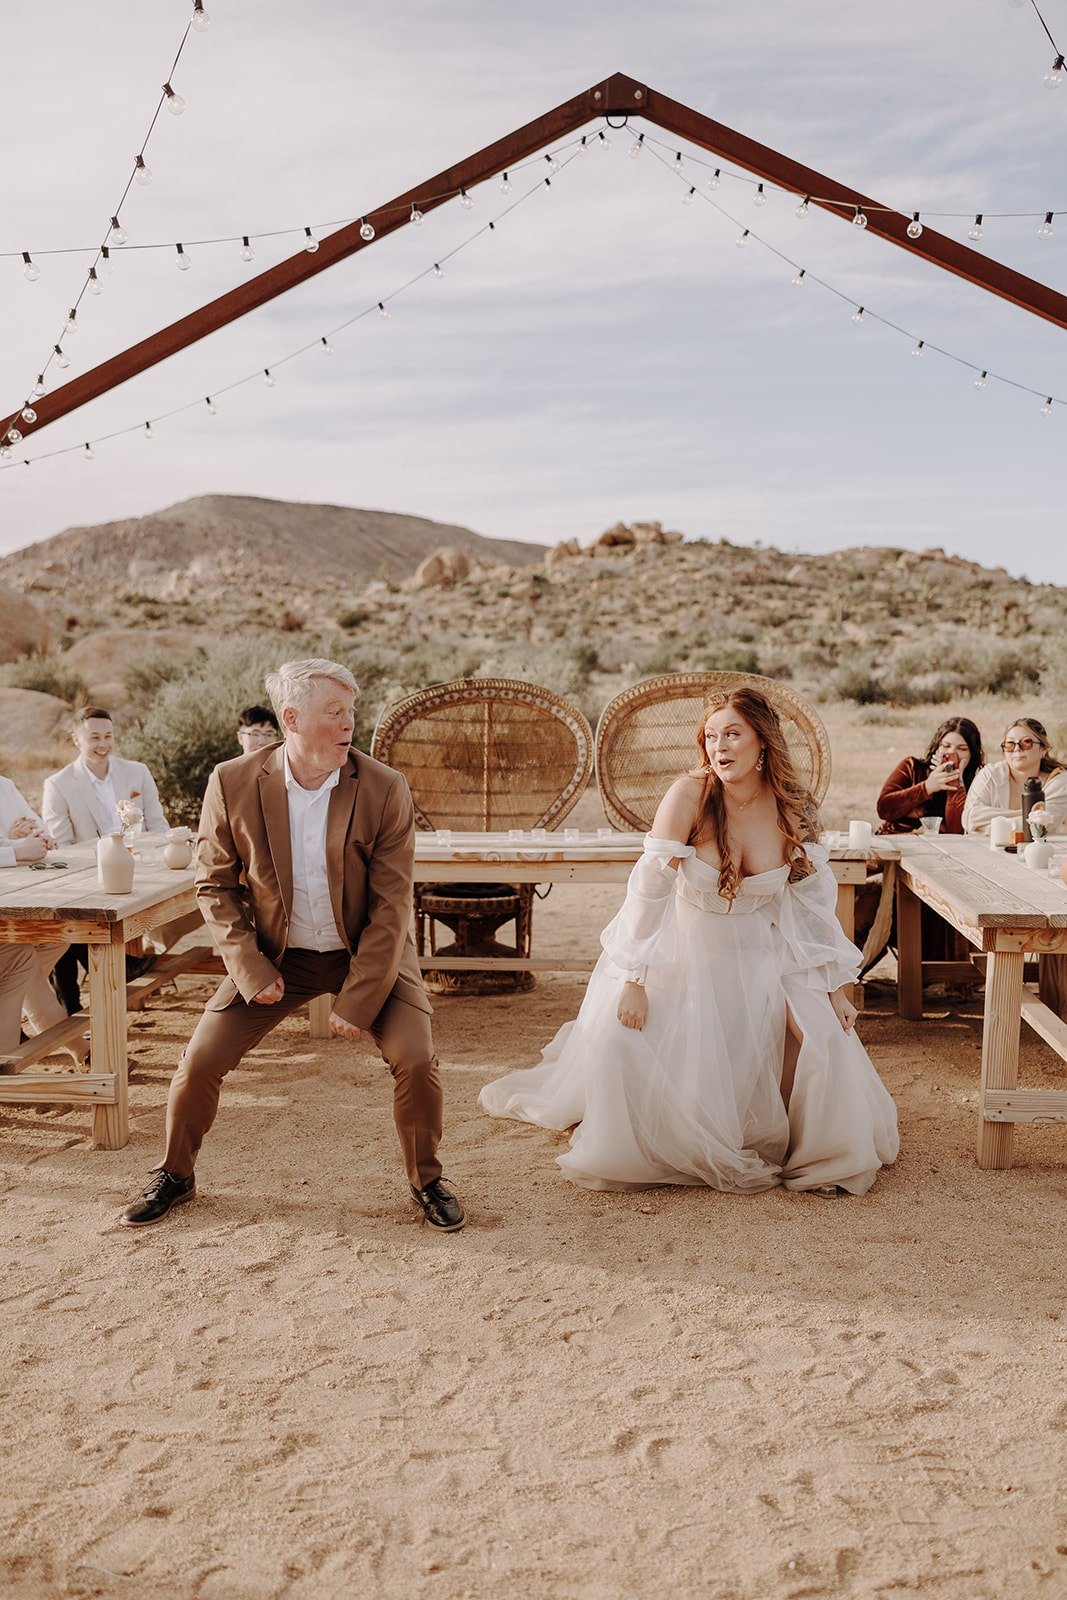 Lively father daughter first dance at Joshua Tree wedding